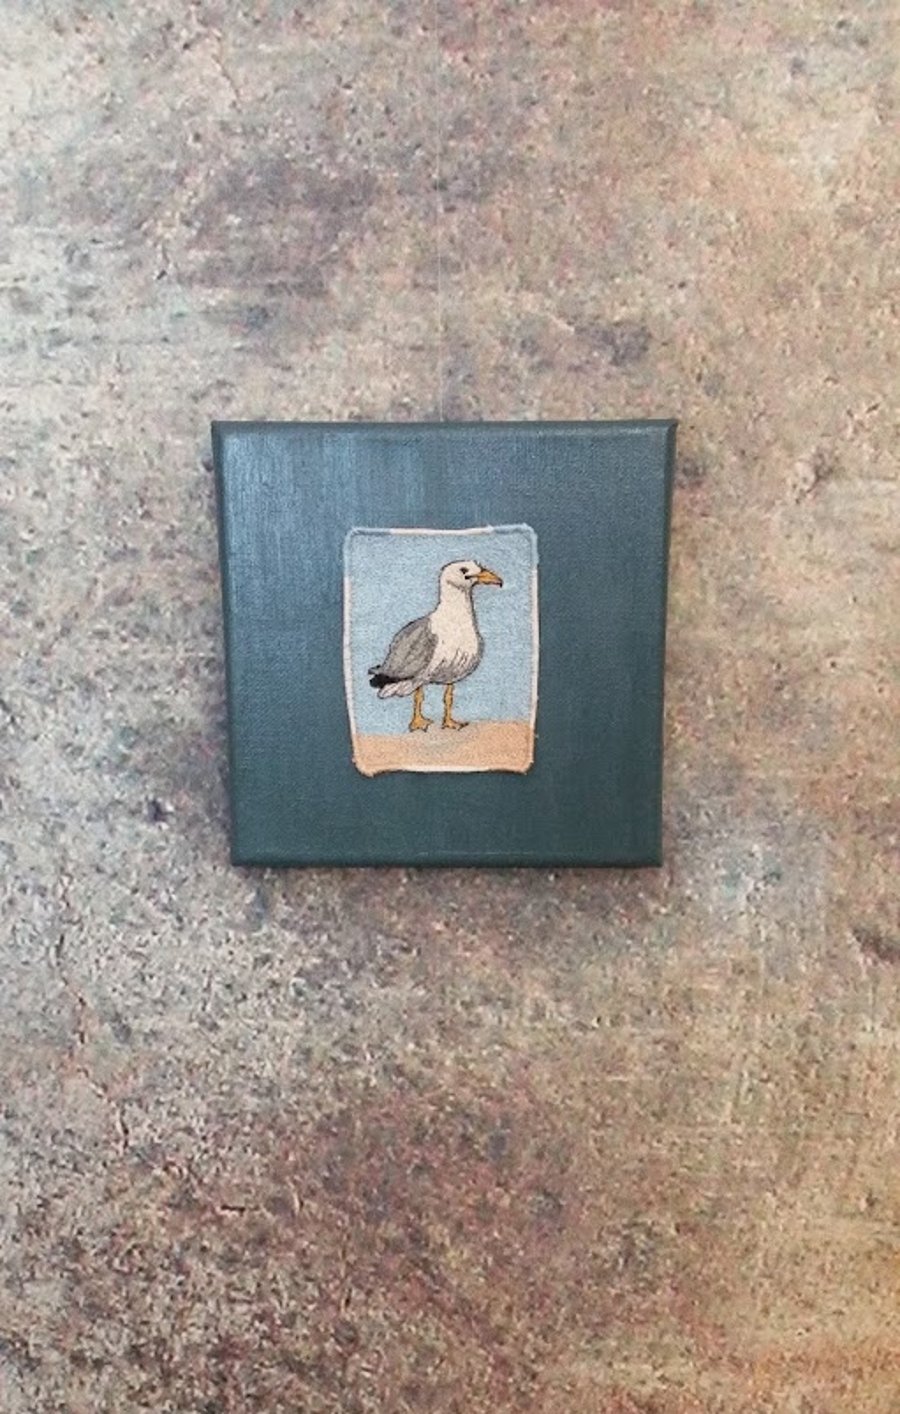 Little stitched seagull interior wallpiece.